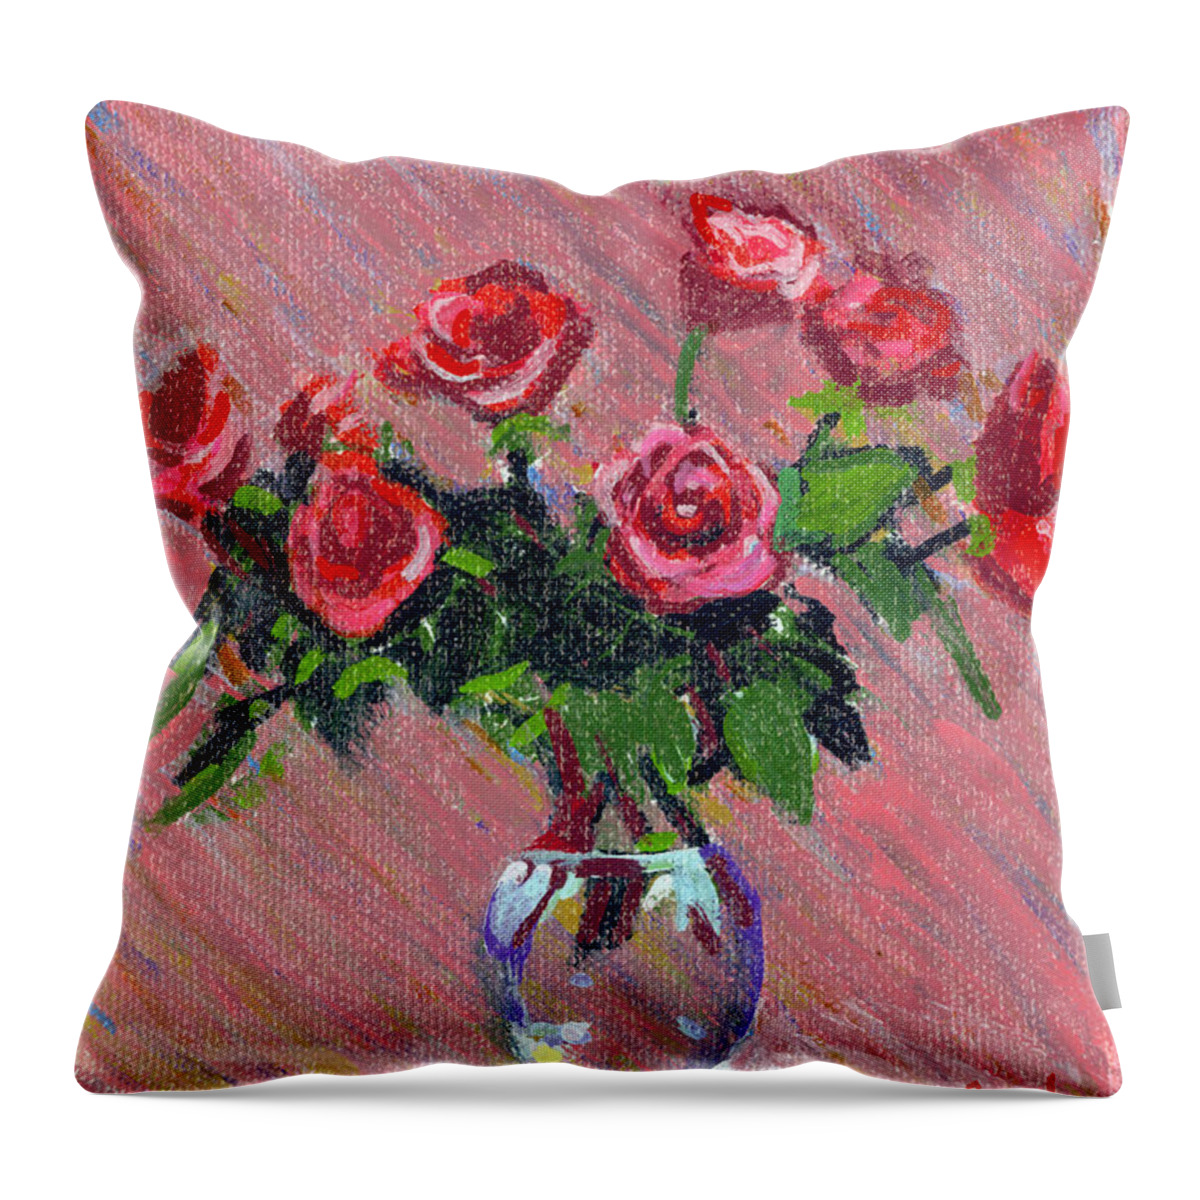 Red Roses On Pink Throw Pillow featuring the painting Roses on Pink by Candace Lovely